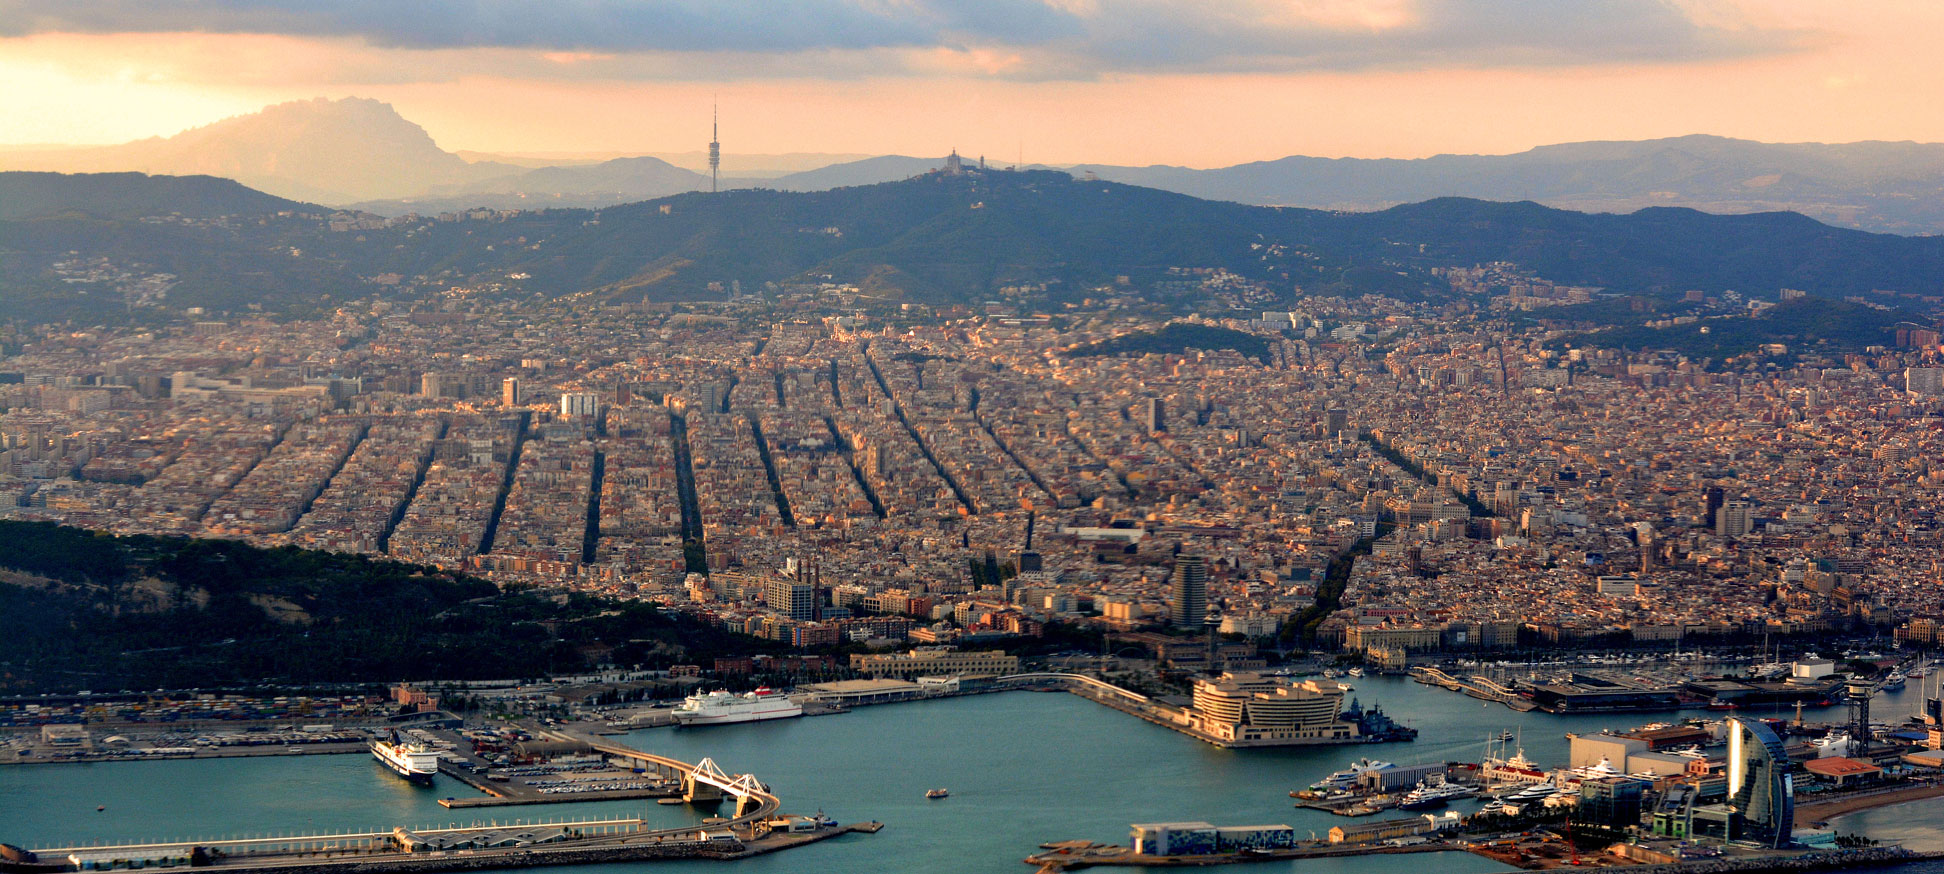 Aerial view of Barcelona, a major Mediterranean port and the capital of Catalonia, an autonomous region of northeastern Spain.